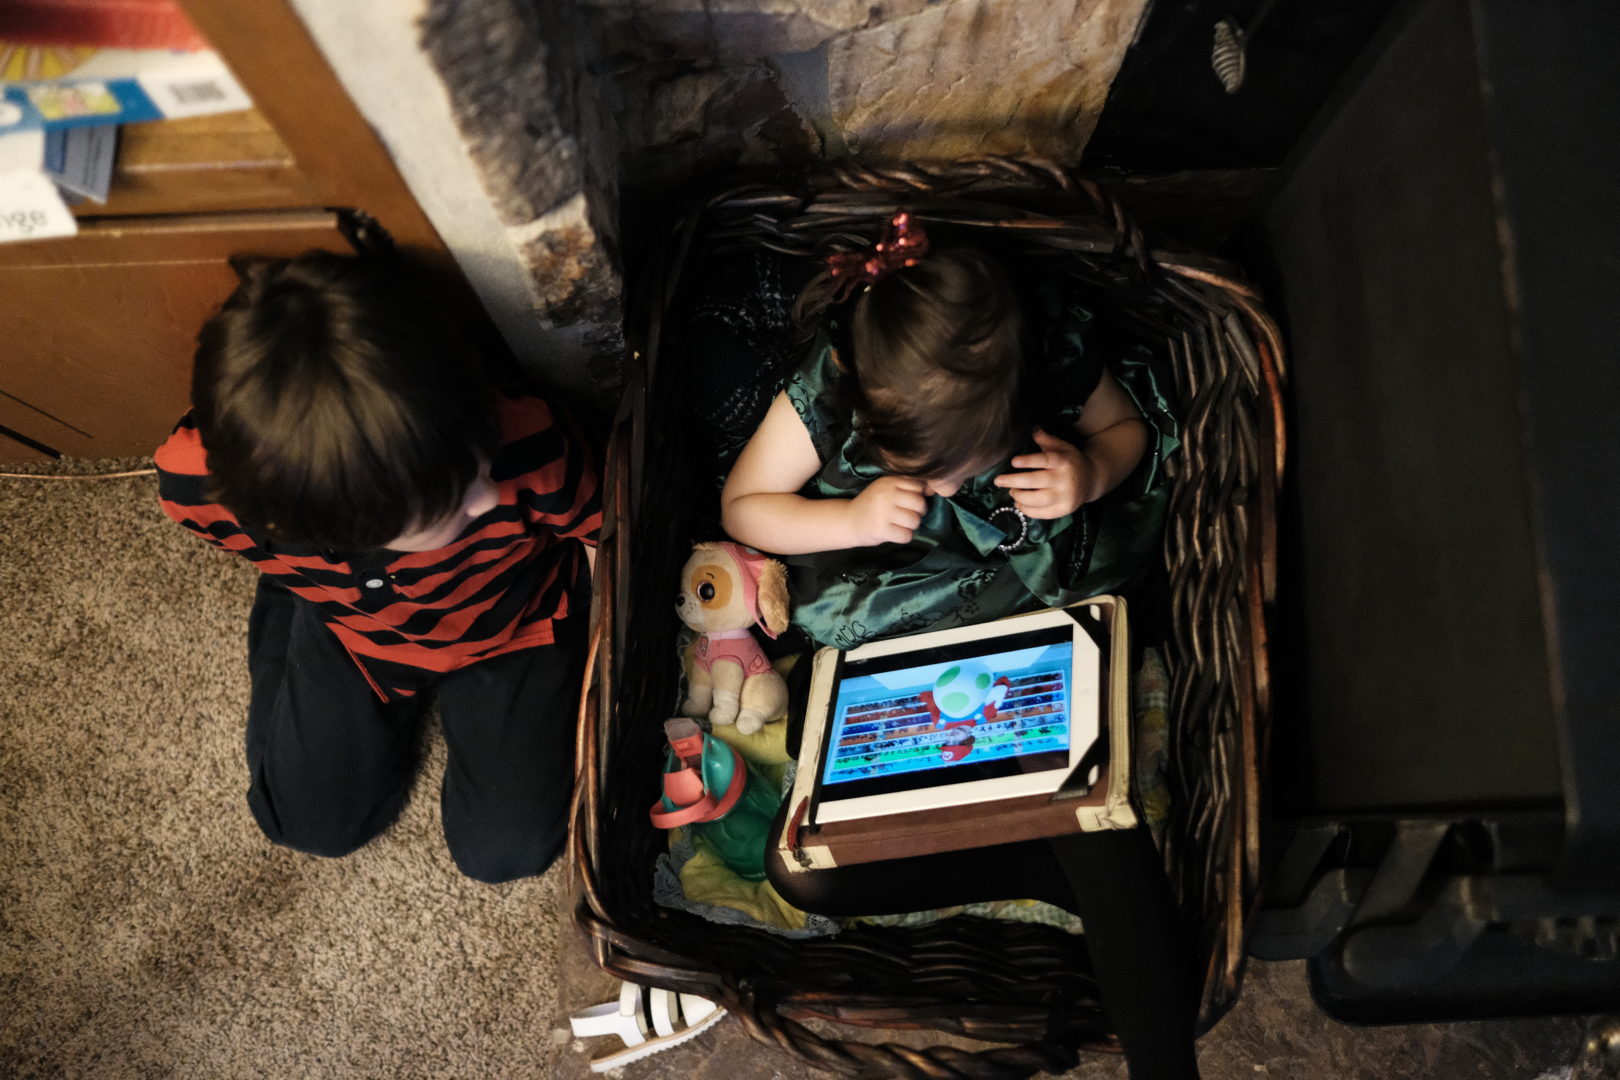 A little girls sits in a basket watching an iPad while her older brother sits next to her.